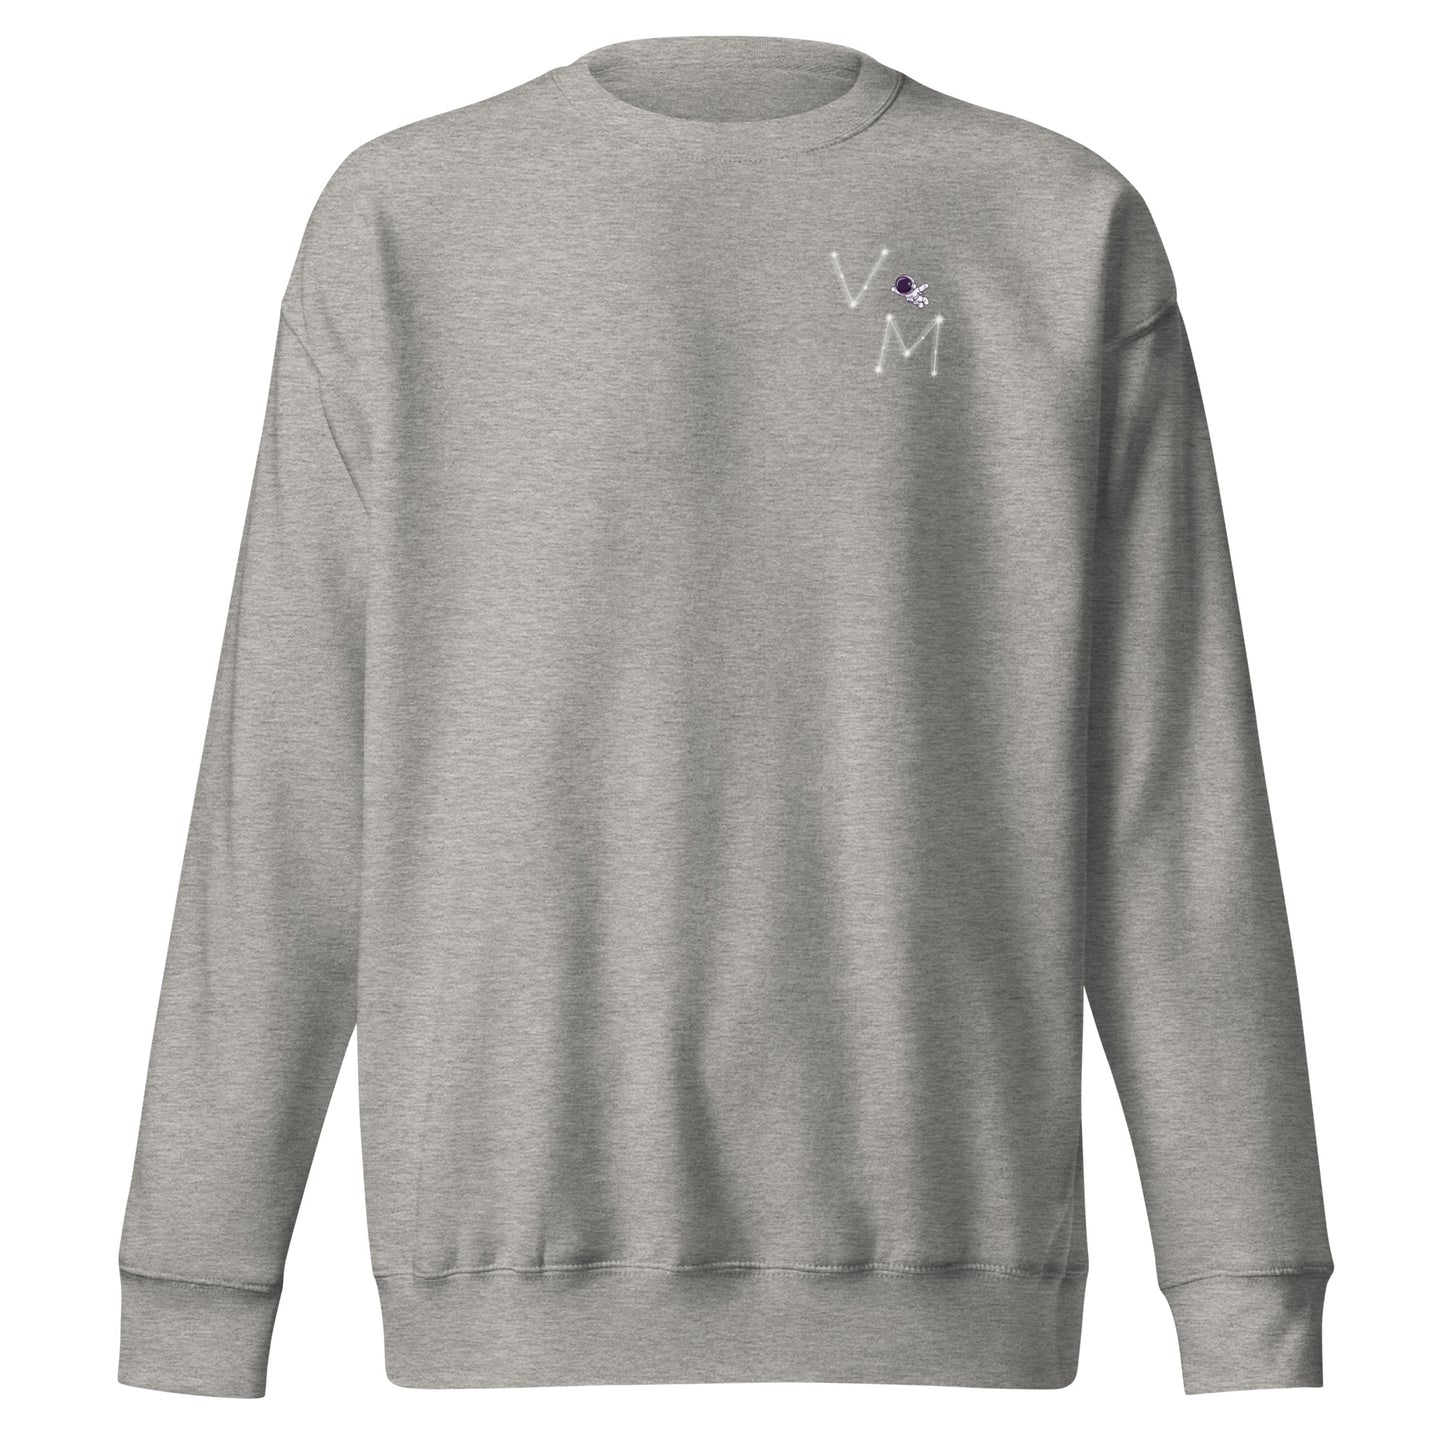 Reaching for the Stars Crewneck